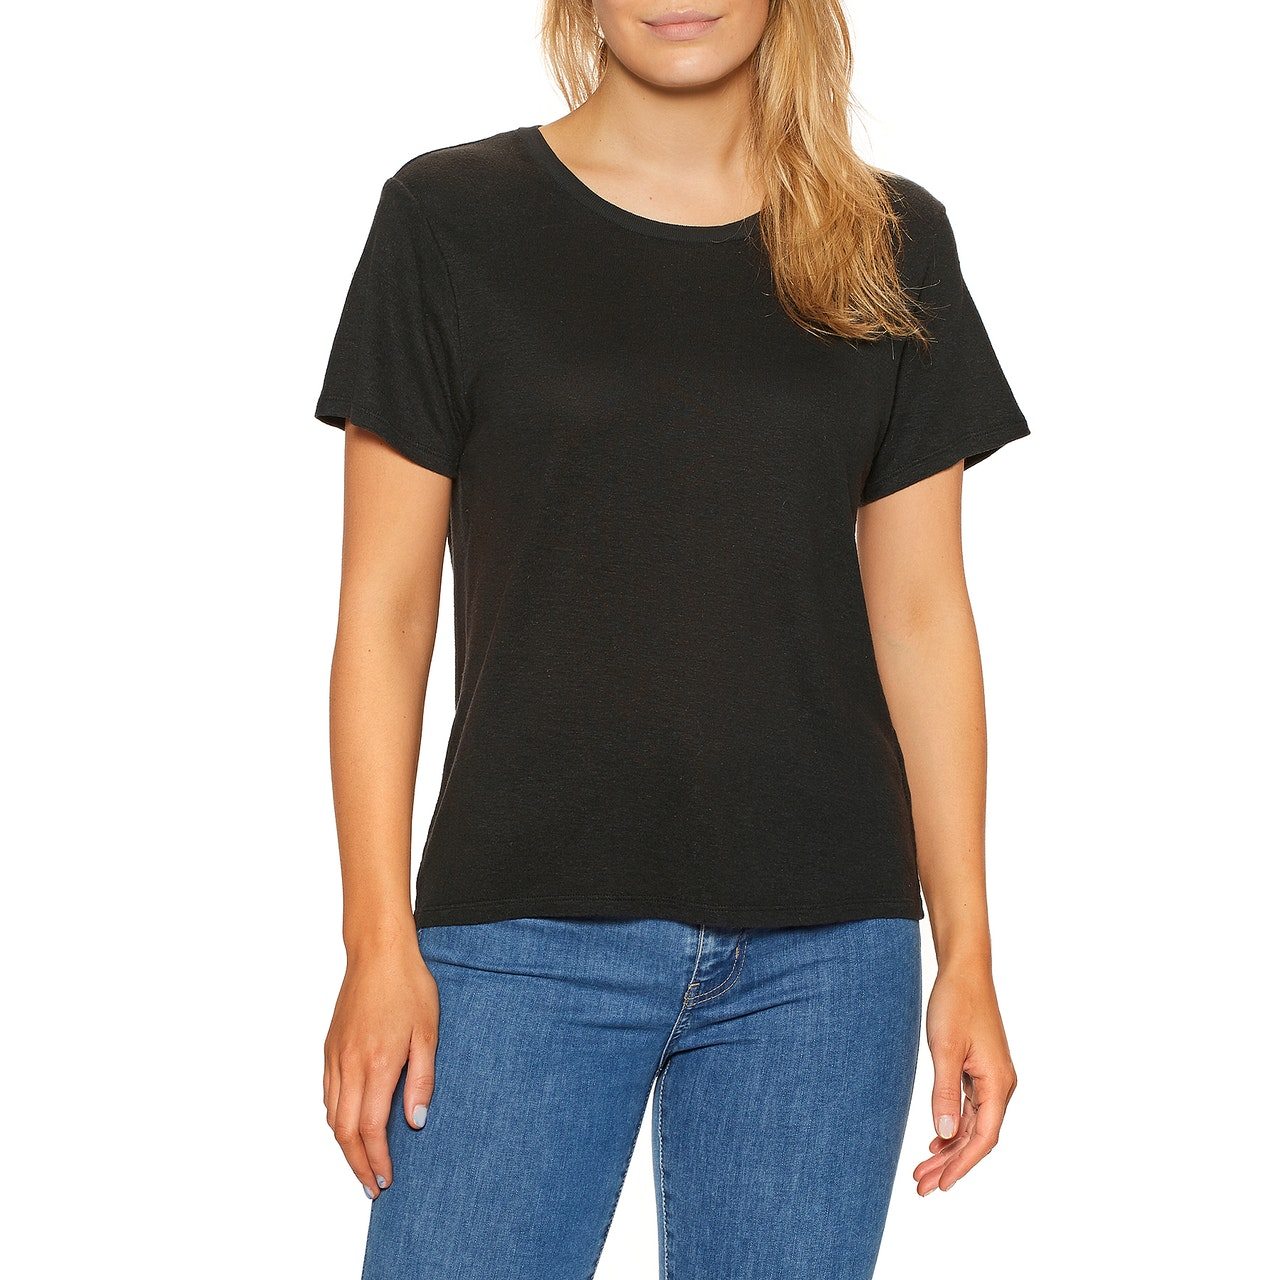 Outerknown Neptune Womens Short Sleeve T-Shirt - Pitch Black